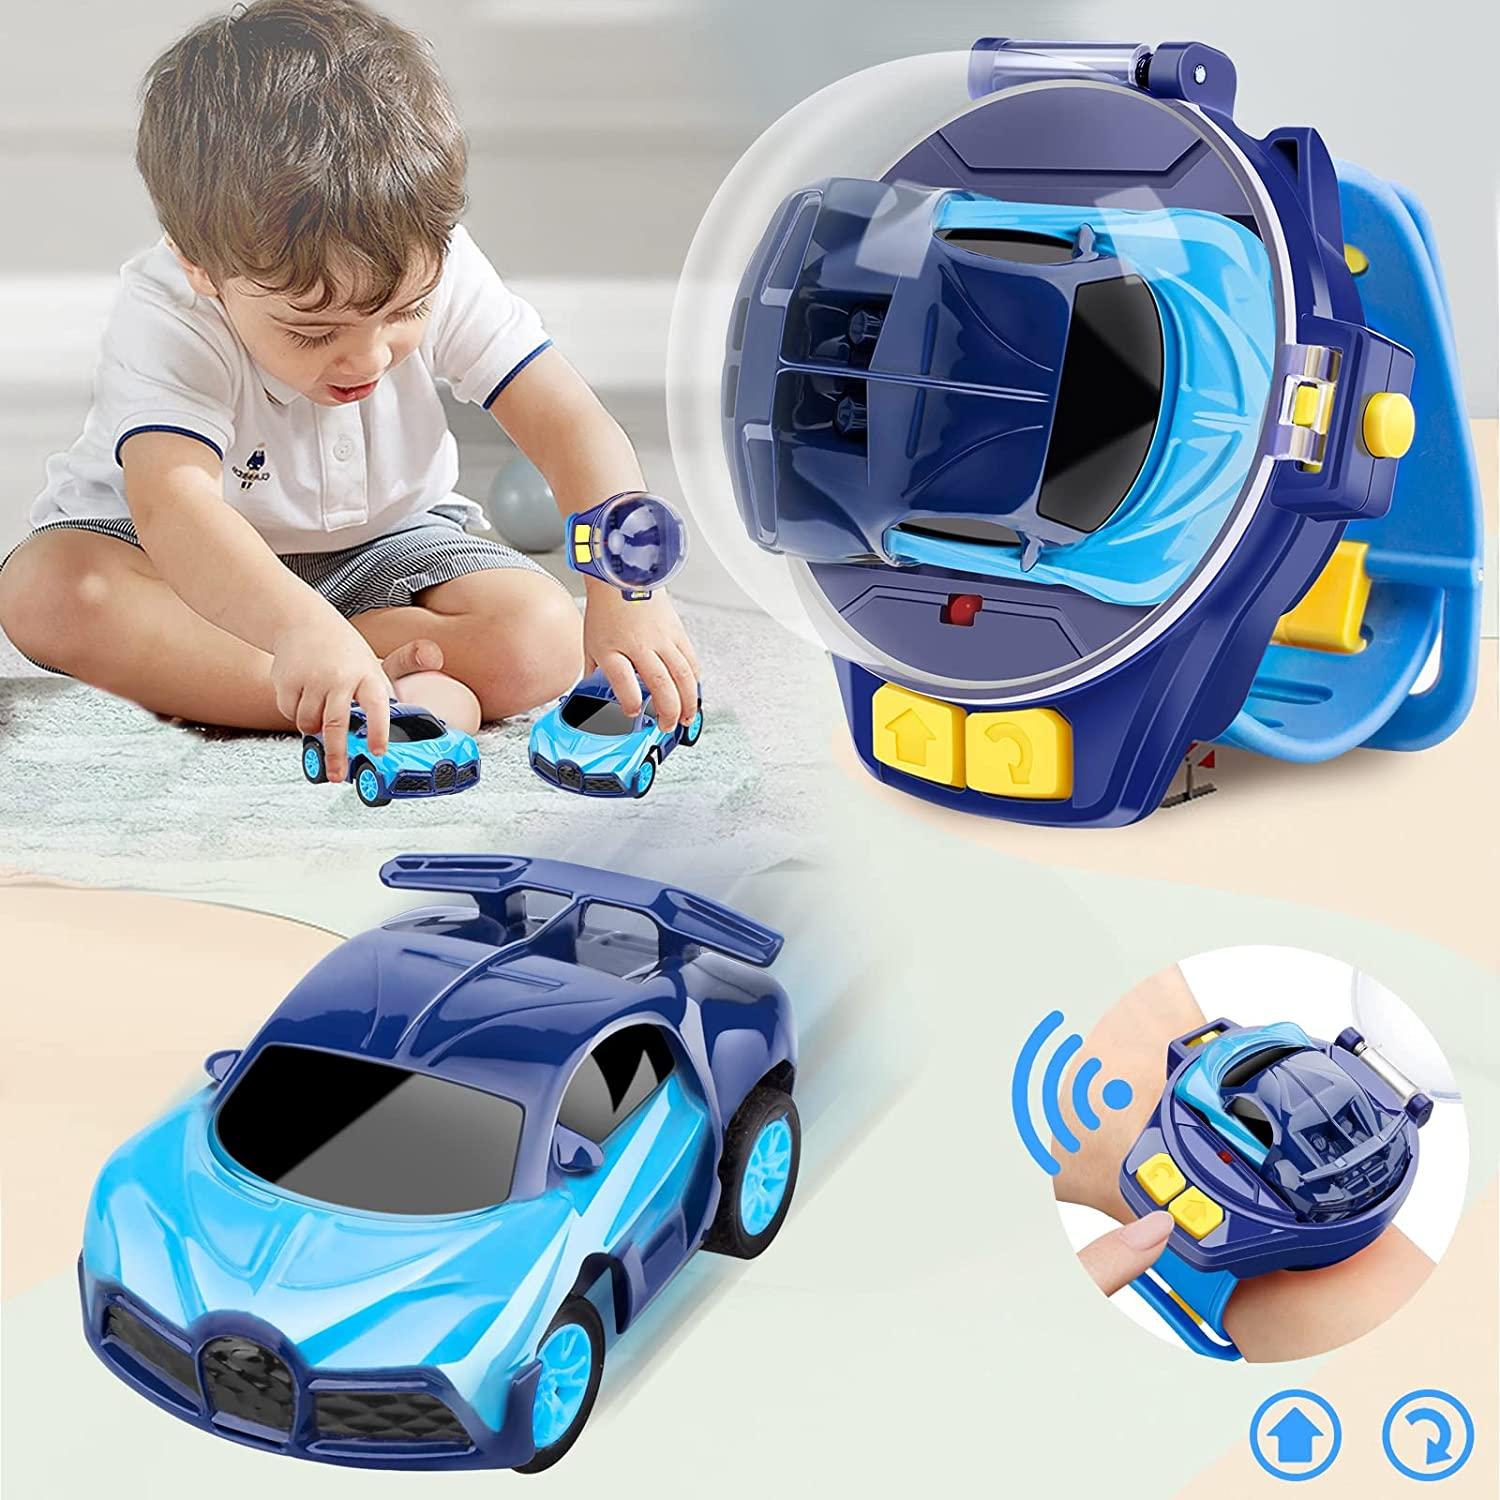 Mini Wrist Watch Remote Control Car: Product Features: Speed, Battery Life, Remote Control Range, Charging Time